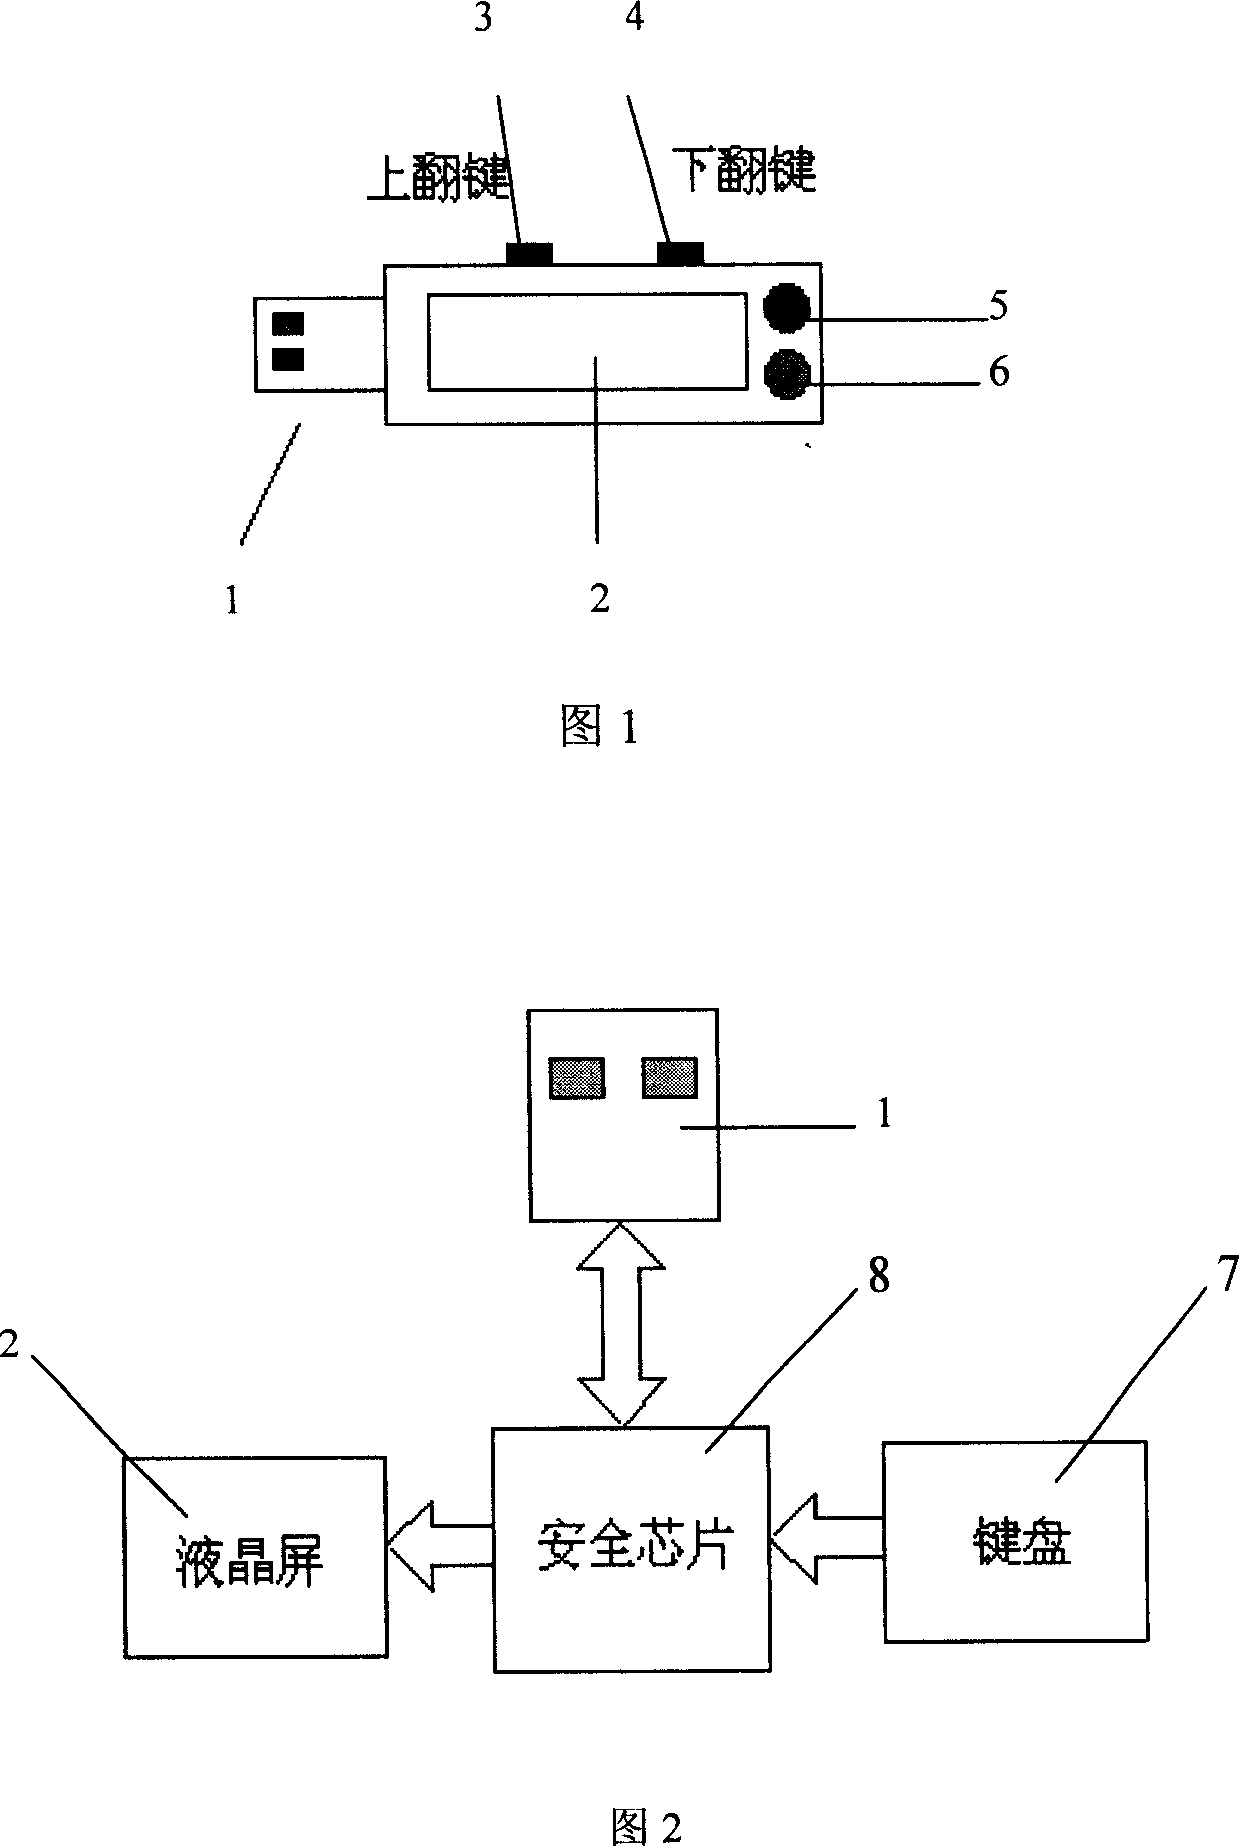 Electronic payment terminal capable of ensuring confidentiality and integrity of information transmission